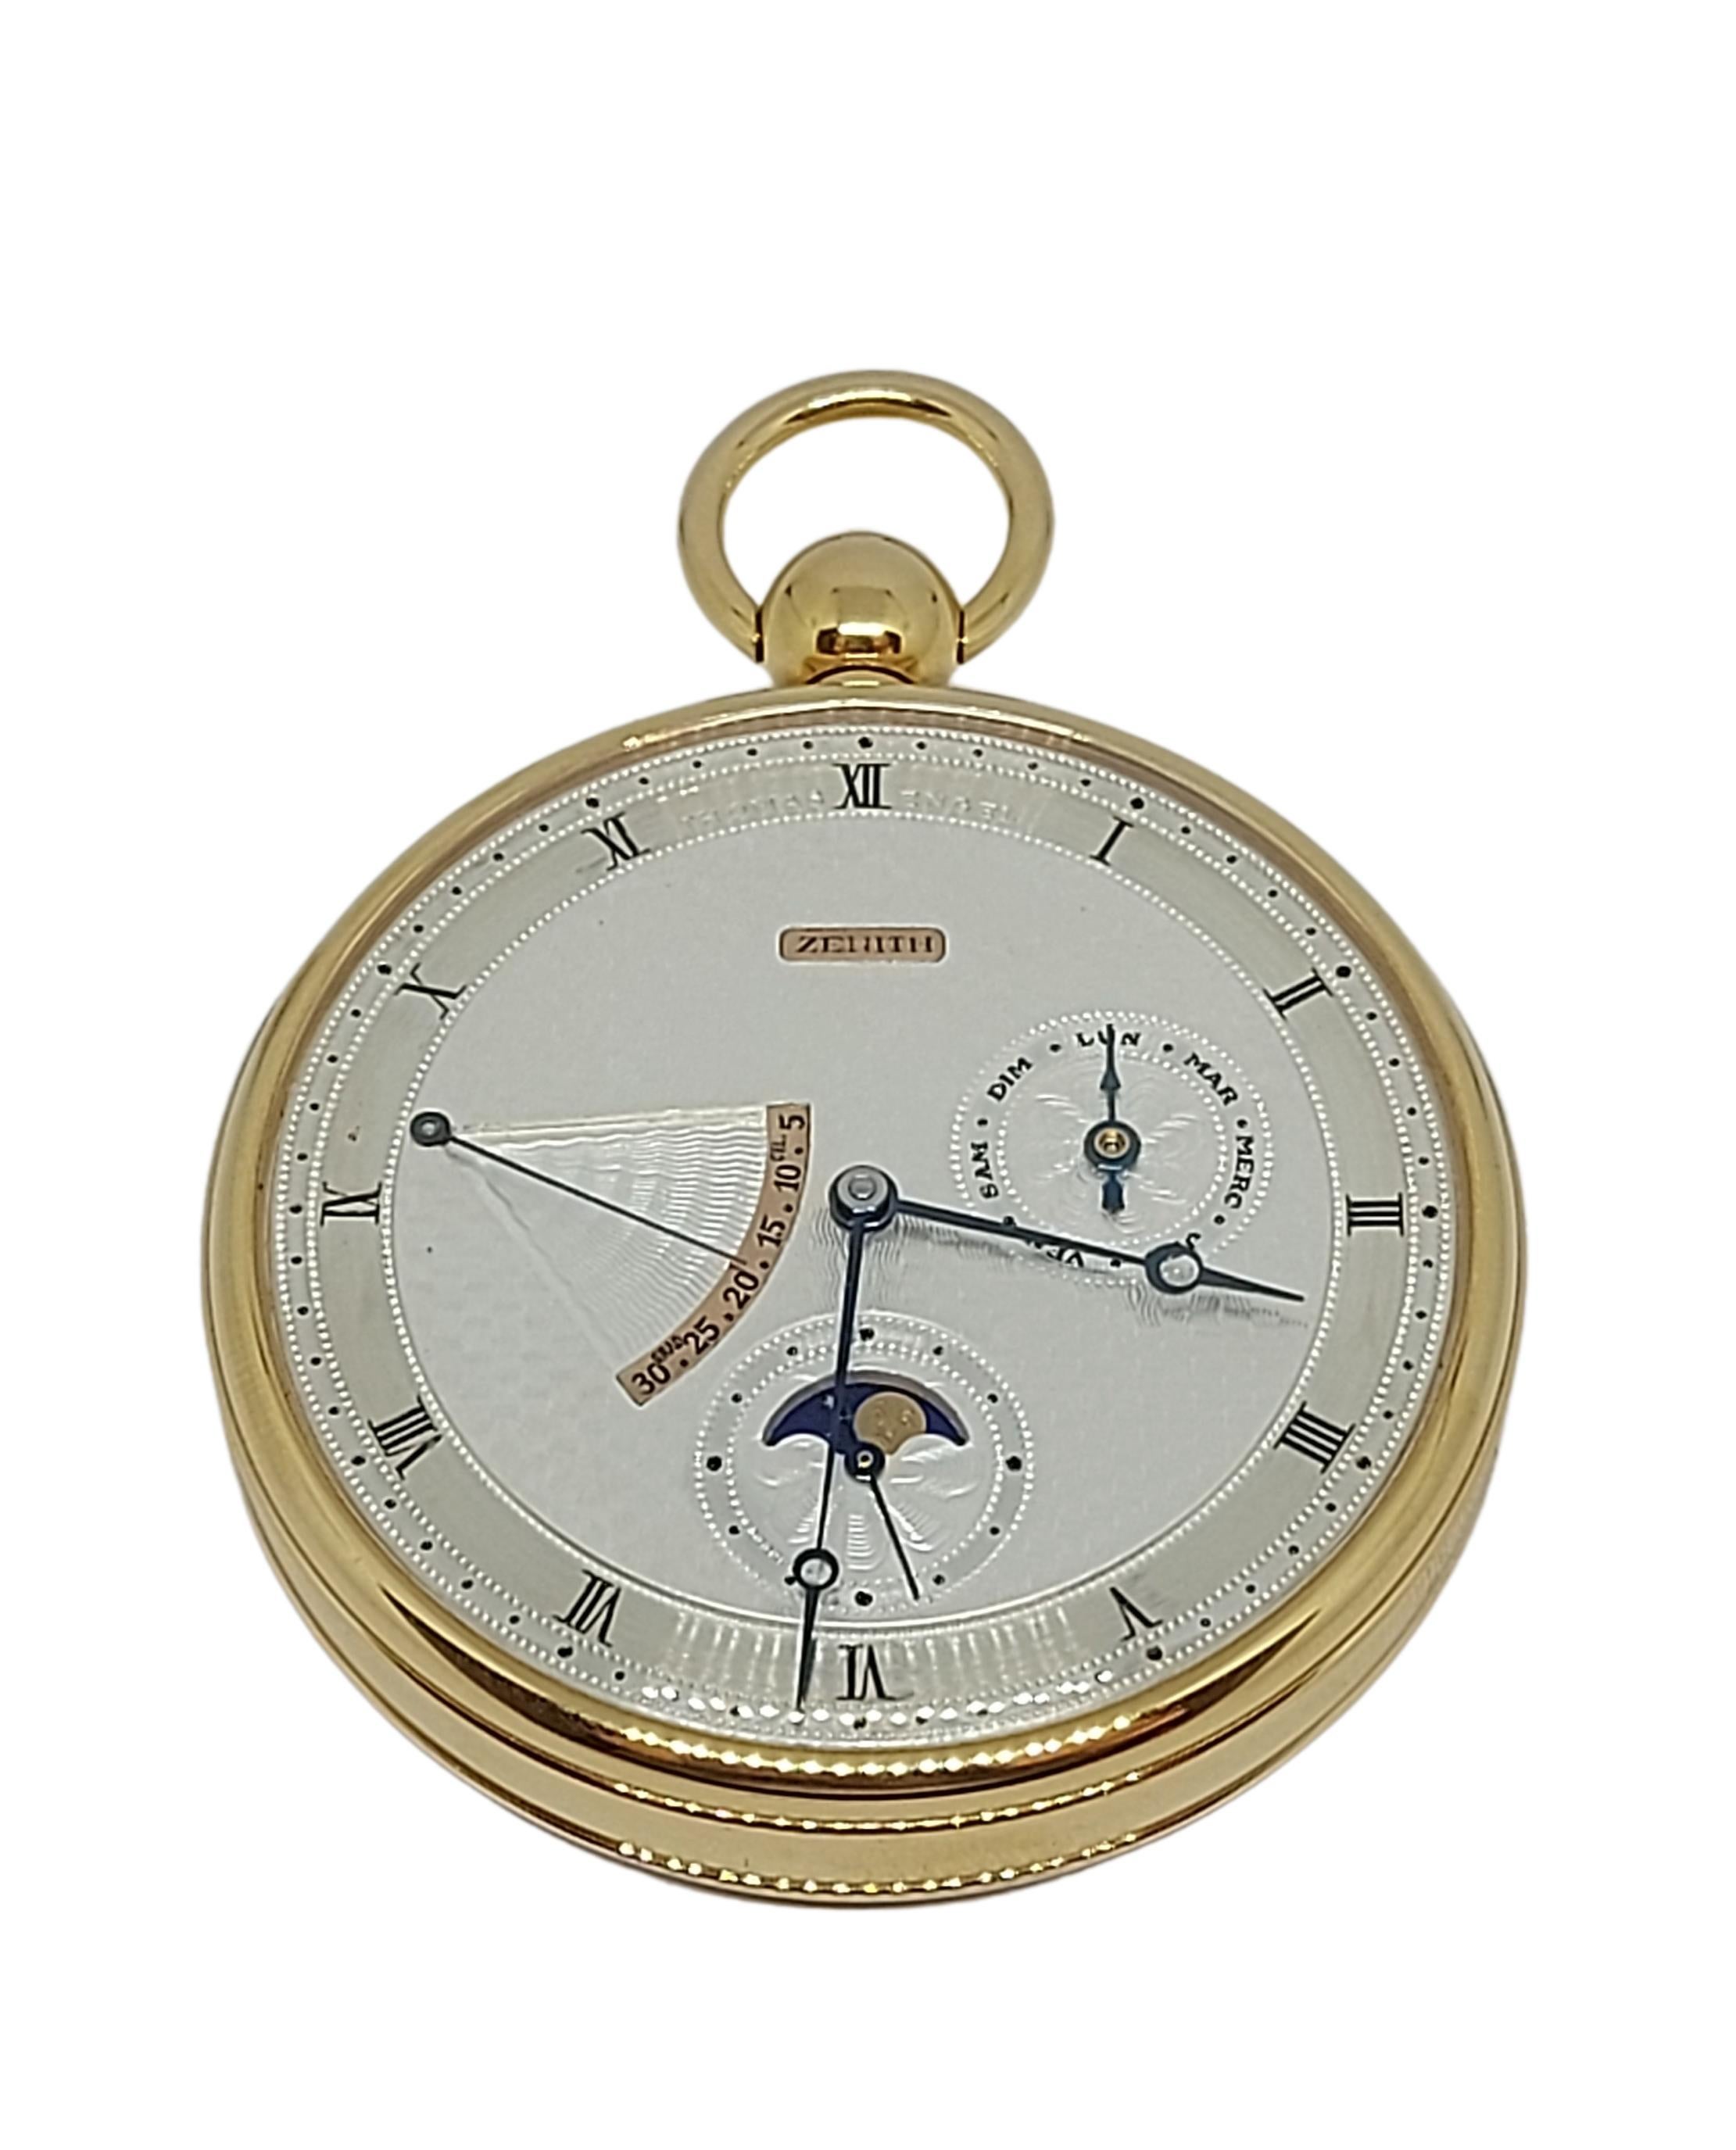 18kt Rose Zenith Open Face Pocket Watch Thomas Engel No° 9 With Box & Papers!

Limited Edition !

Movement: Mechanical Hand winding

Functions: Hours, minutes, small seconds, moon phases, days of the week, thermometer. 

Case: 18kt Rose gold